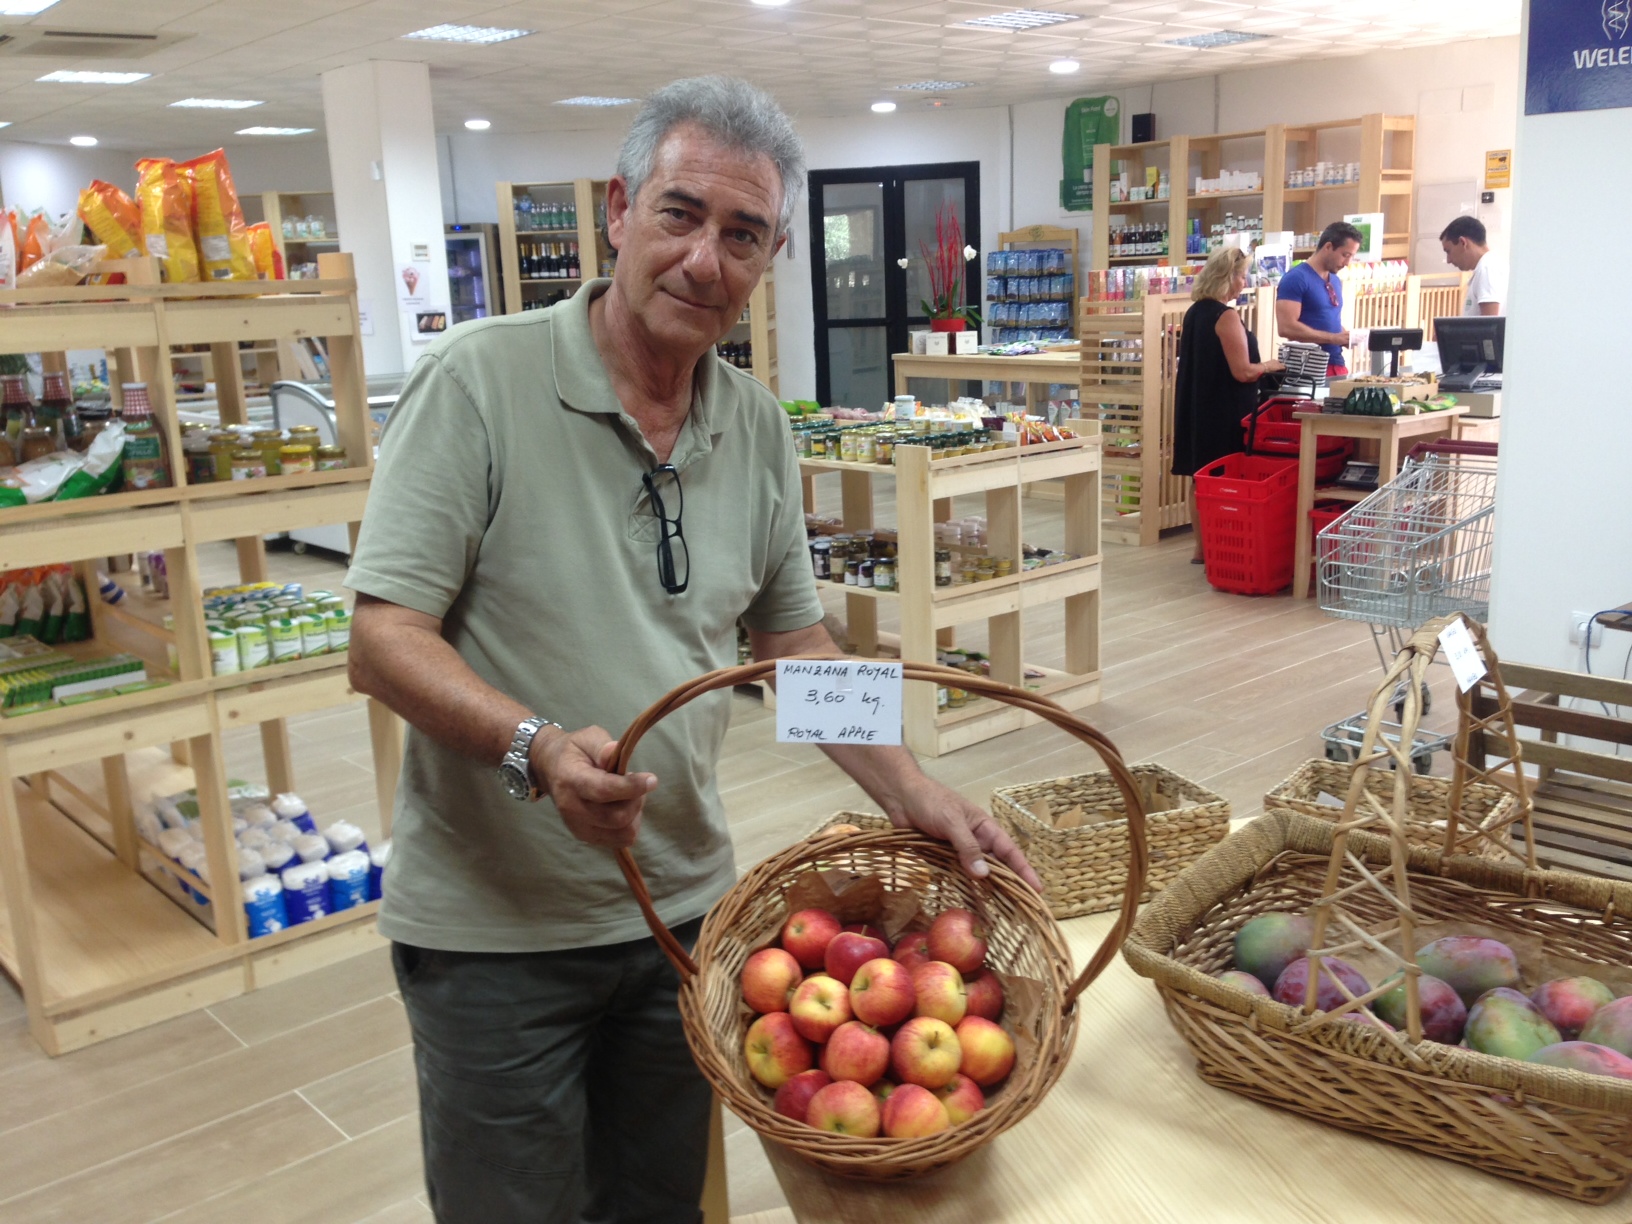 Family-run Chipolino Natural in Centro Comercial Los Halcones, in Benahavis, on the Ronda road, is stocking everything from non biological washing powder to organic pet food